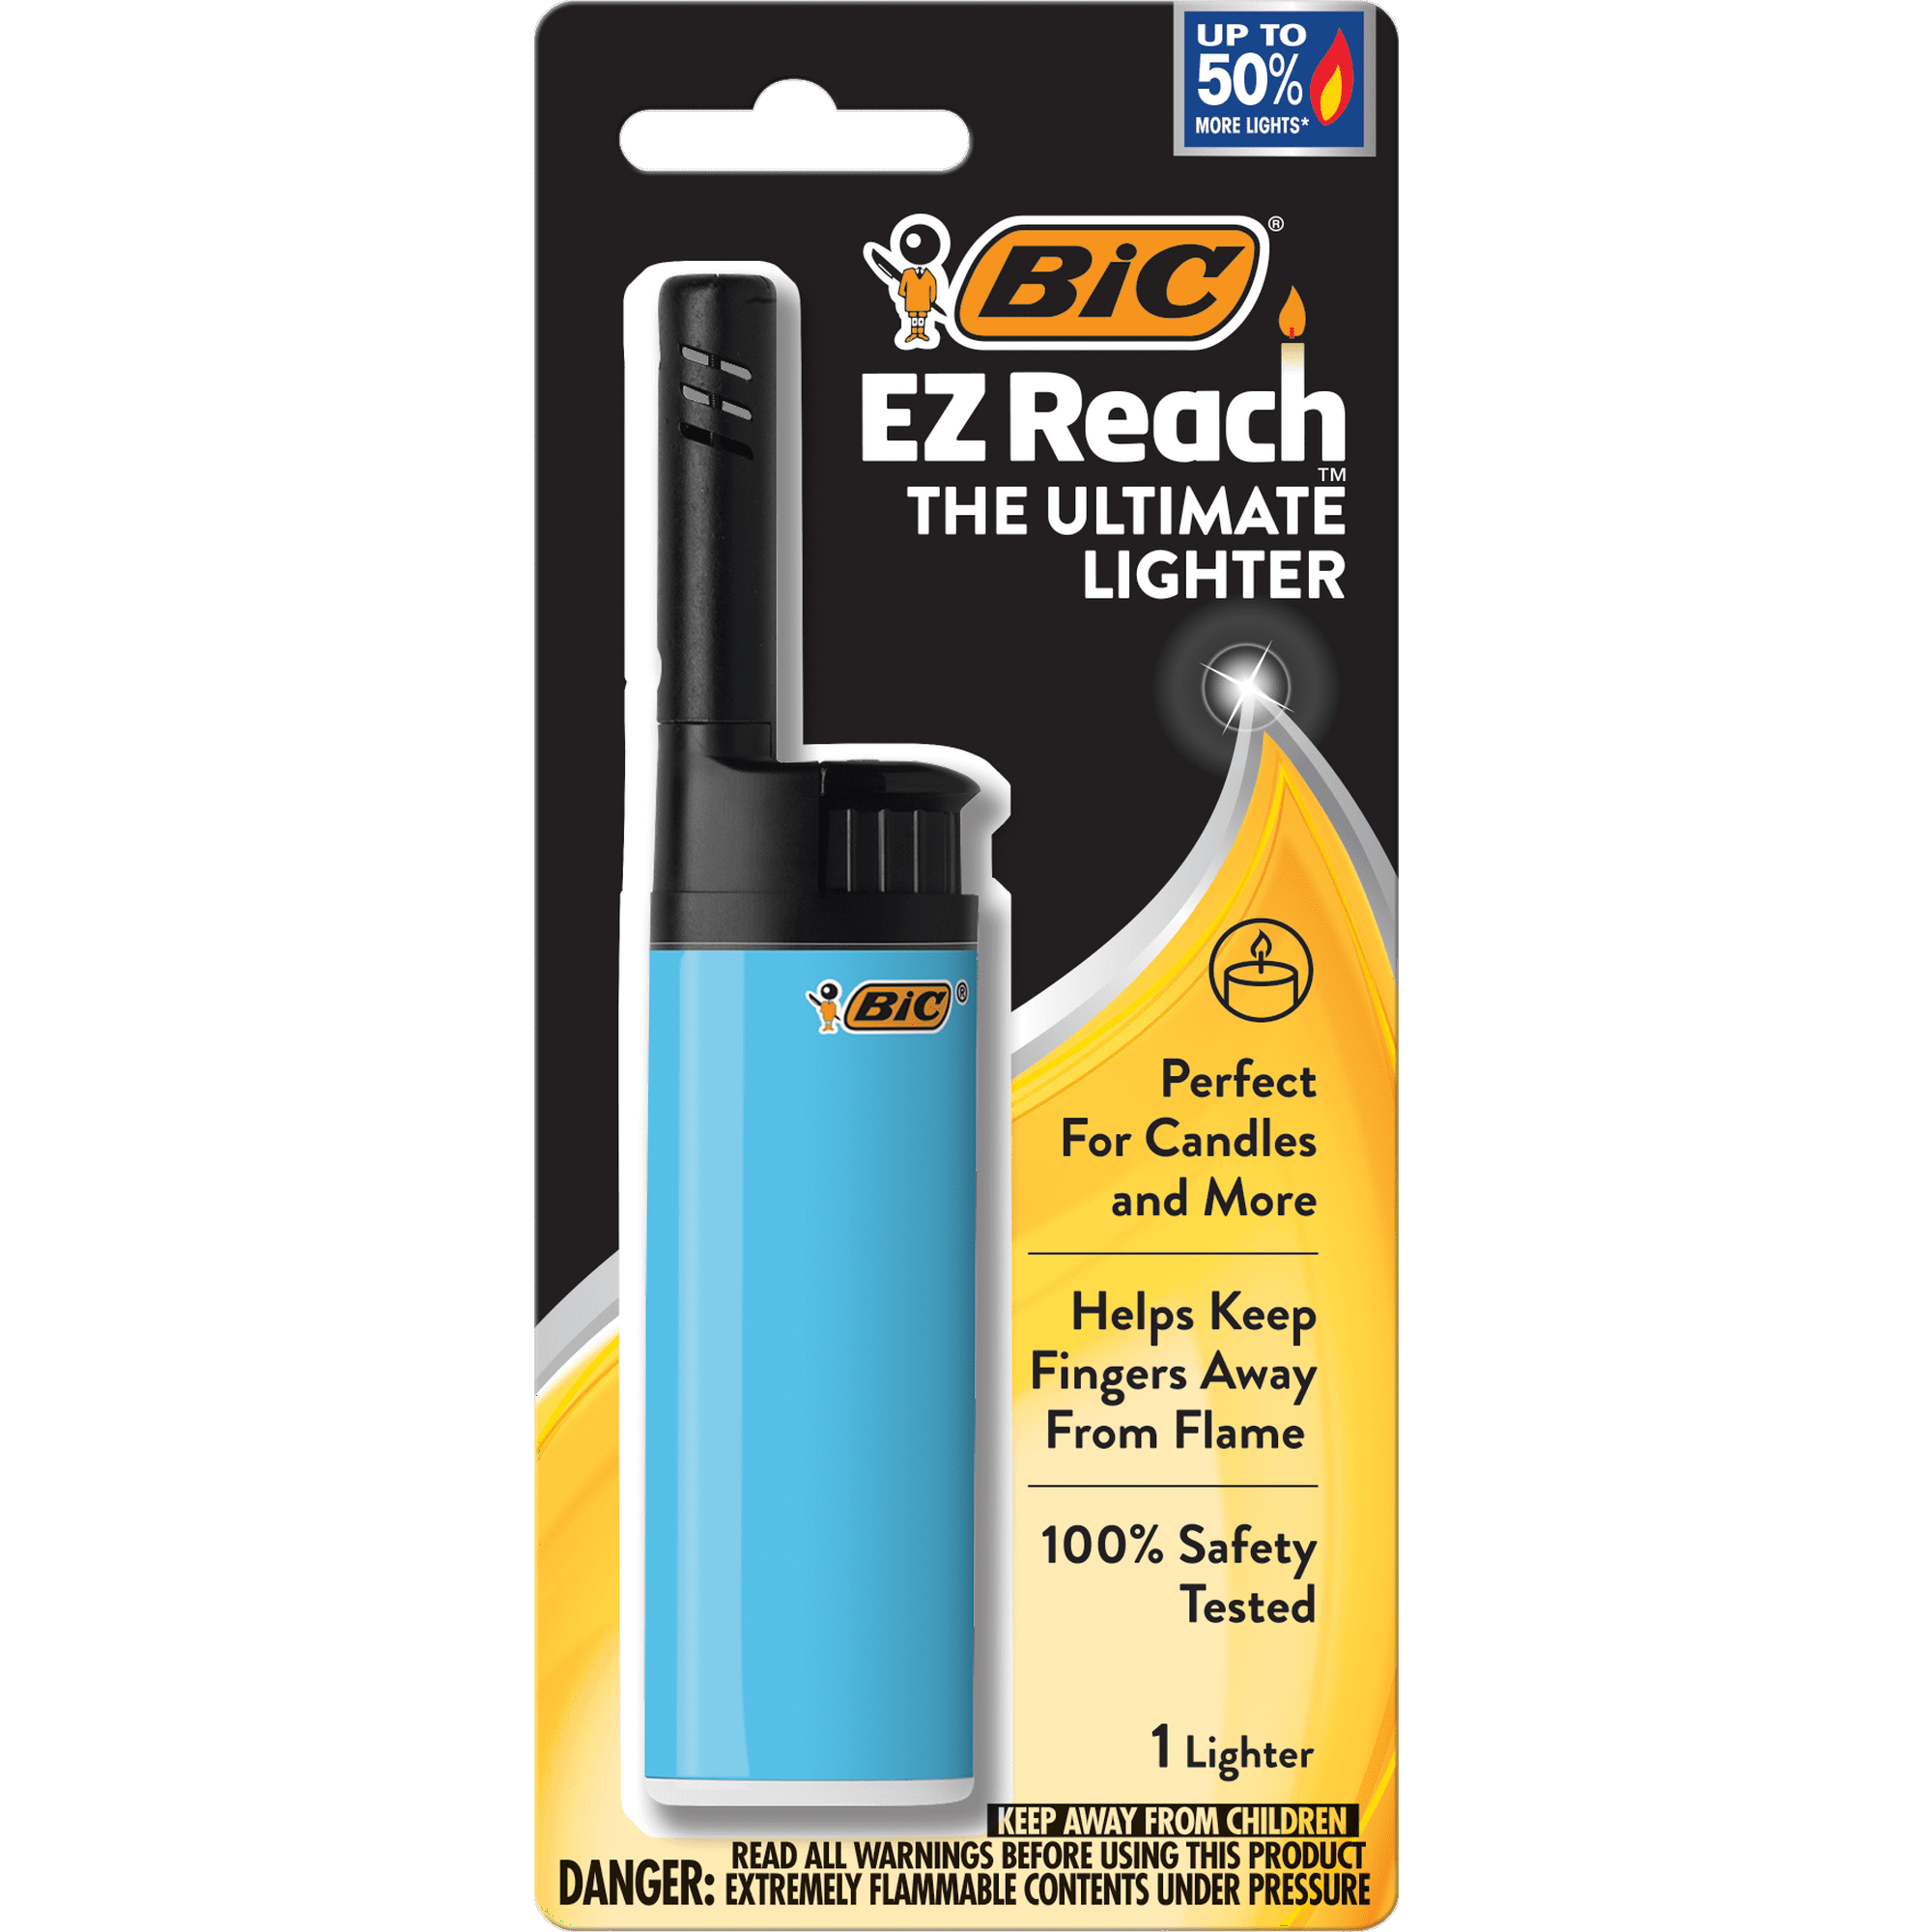 Case of 1 - Bic Ez Reach The Ultimate Lighter - 1pc